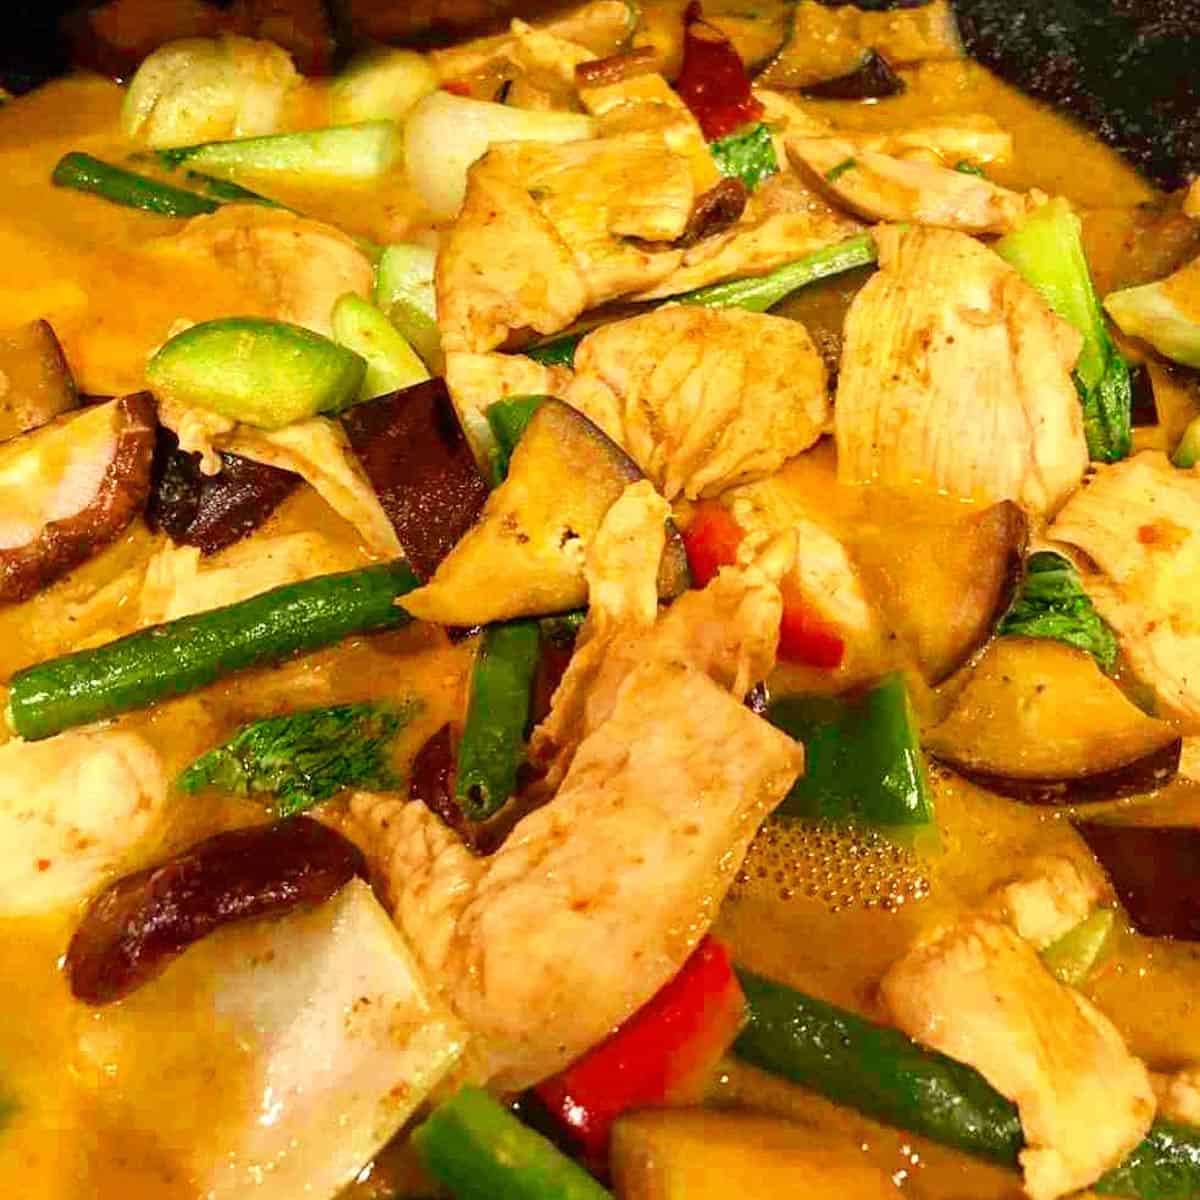 Chicken in red curry sauce with vegetables.